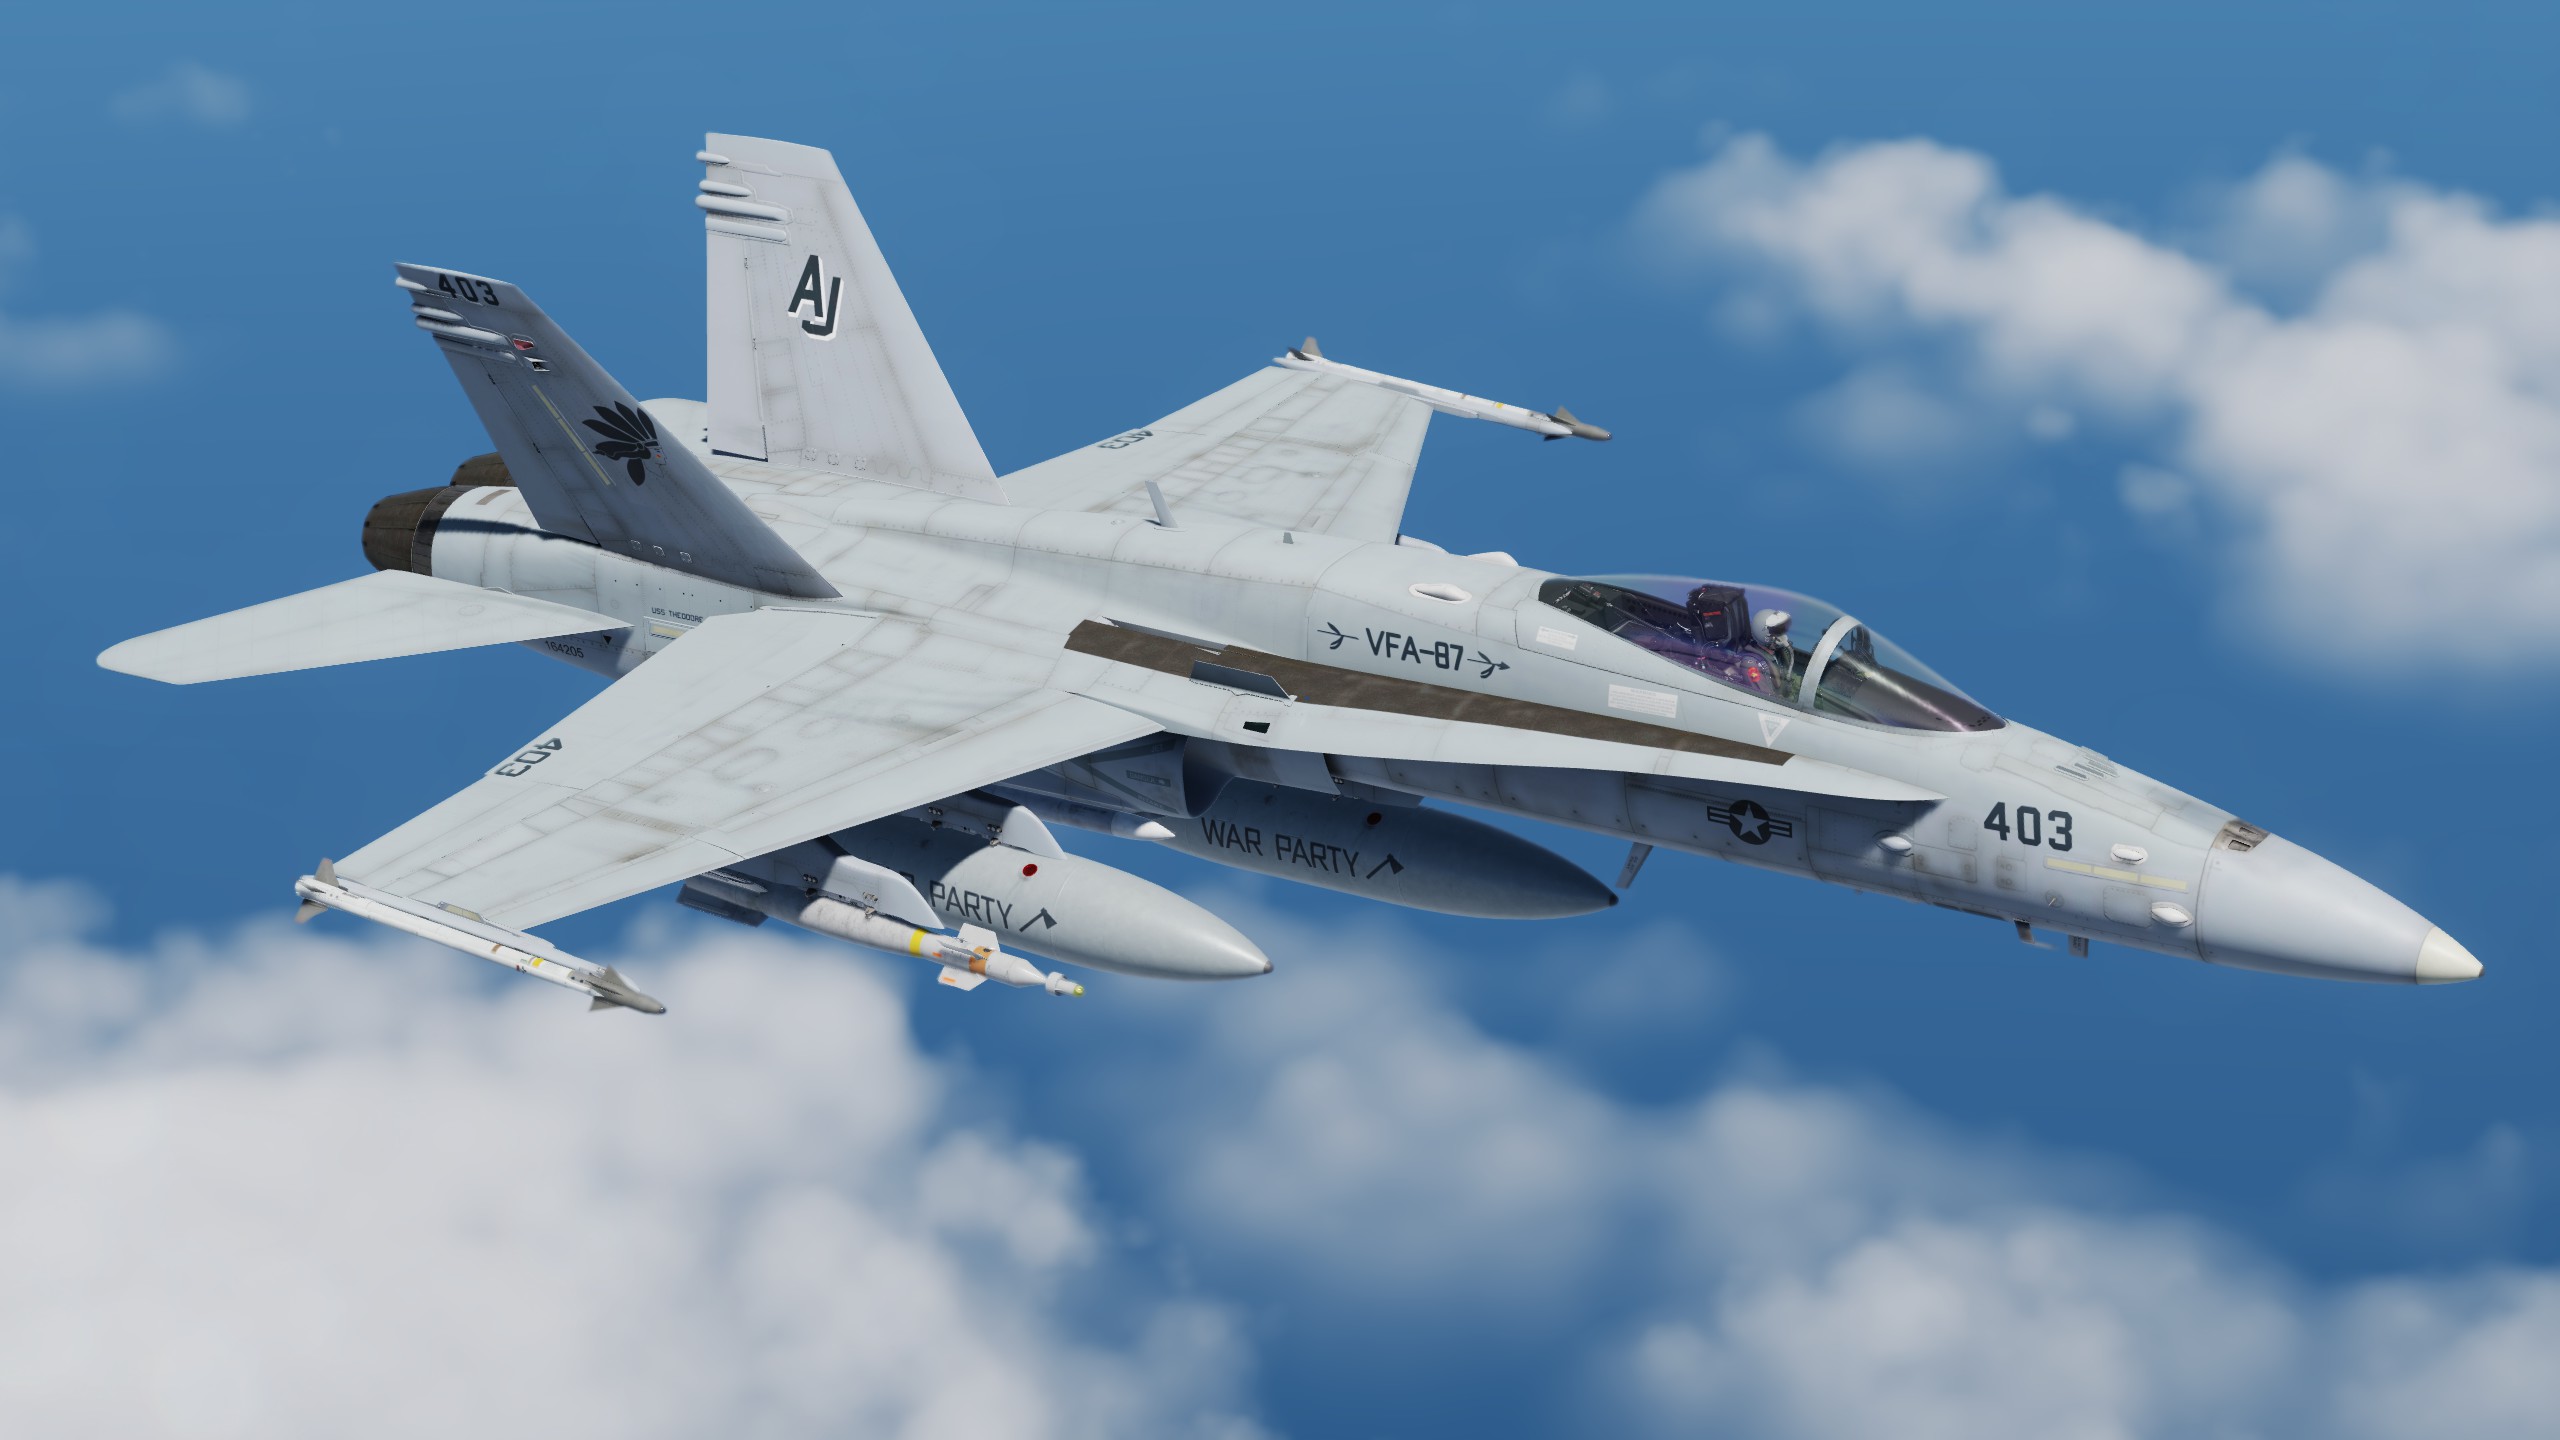 F/A-18C Hornet VFA-87 mid 2000s